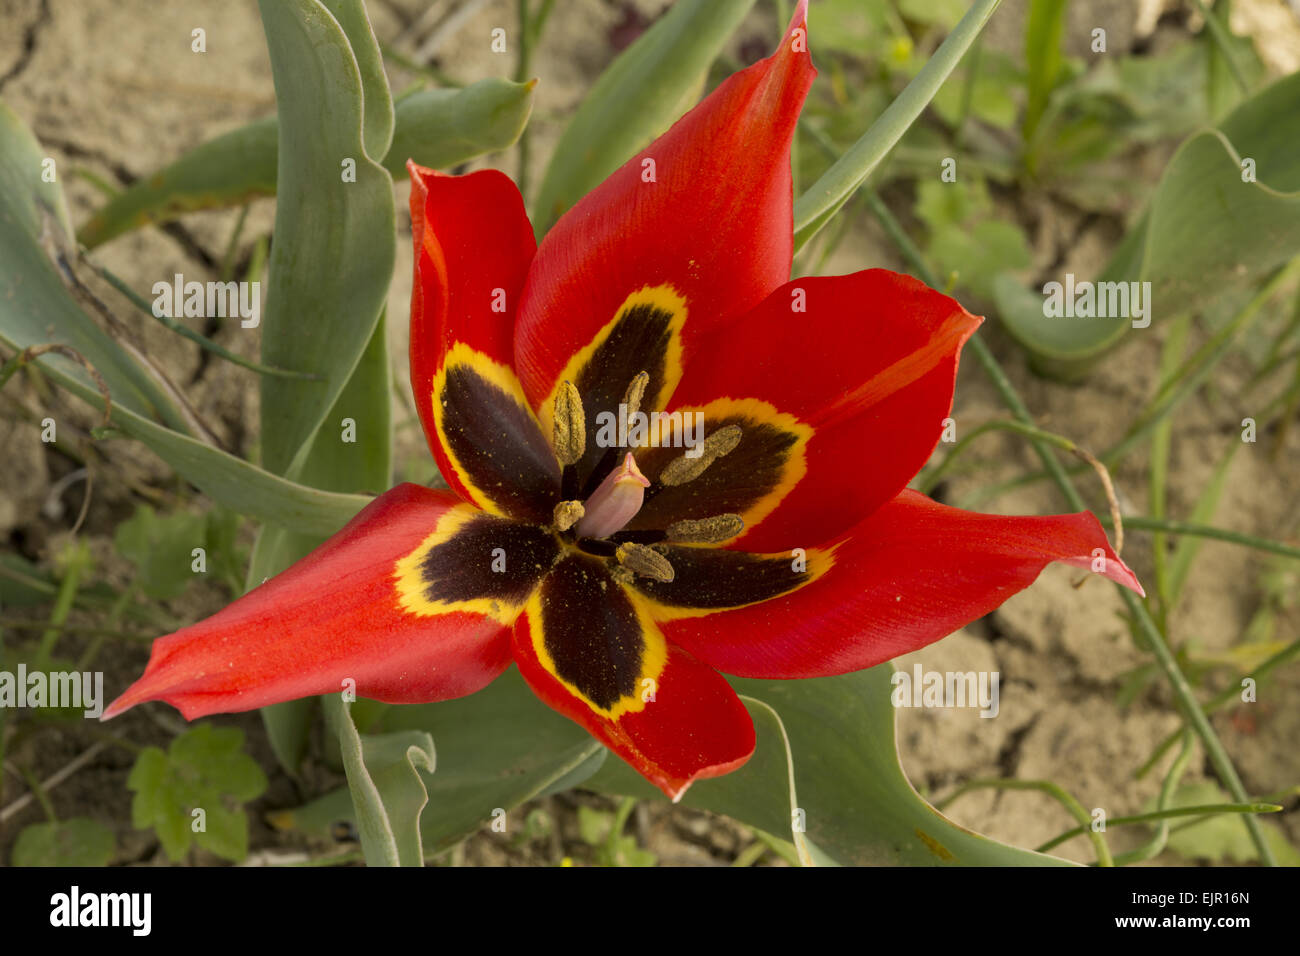 Eyed Tulip (Tulipa agenensis) close-up of flower, growing in arable field, Cyprus, March Stock Photo